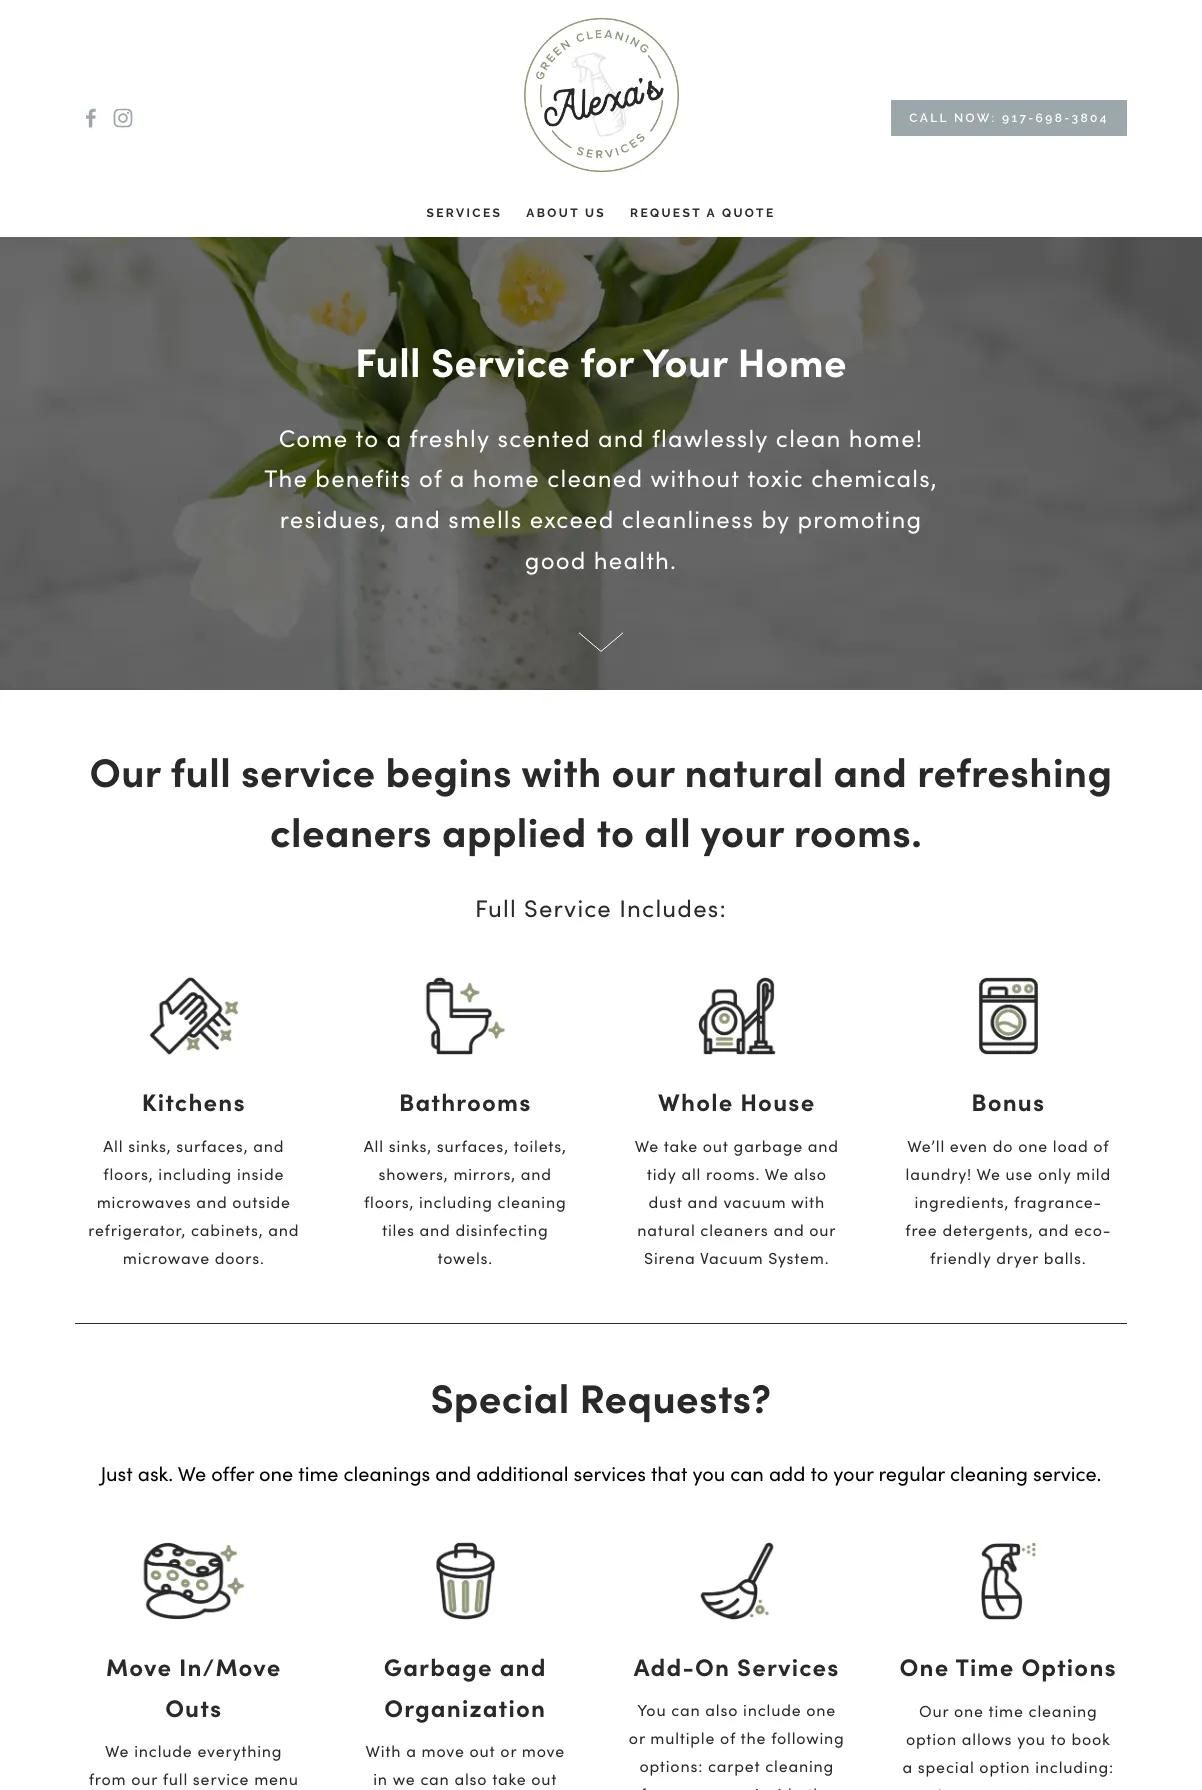 Screenshot 2 of Alexa's Green Cleaning Service (Example Squarespace Cleaning Services Website)